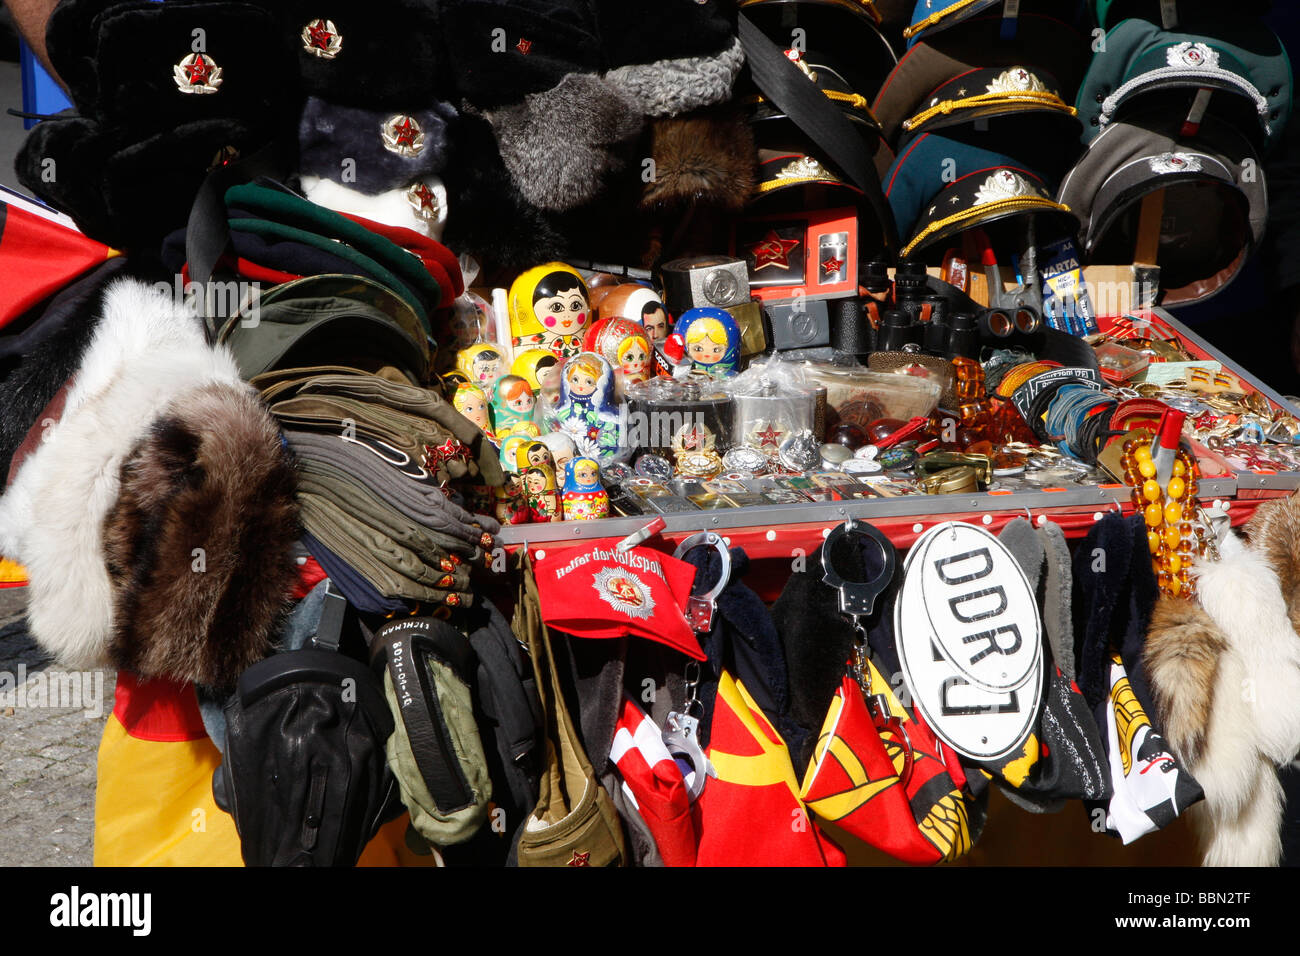 Souvenir shop at Checkpoint Charlie, Berlin, Germany, Europe Stock Photo